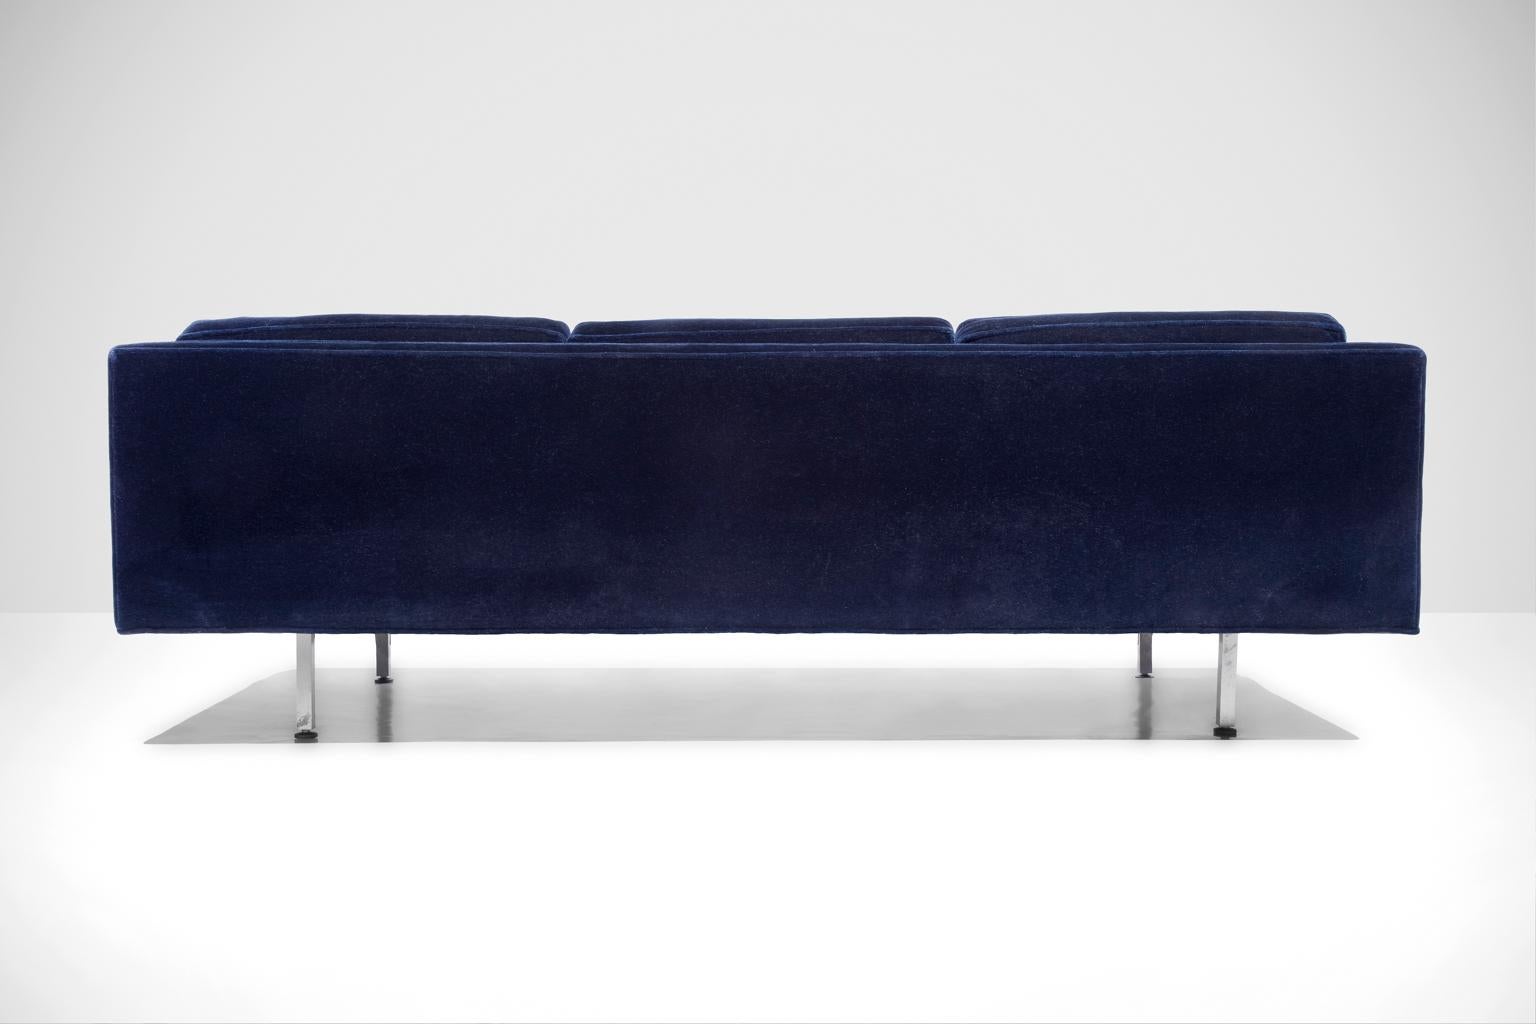 SALE ONE WEEK ONLY

Rare Mid-Century Rich Royal Blue Alpaca Three-seat Sofa by Edward Wormley for Dunbar sits on square chrome legs. It has one tufted seat cushion and three loose back cushions and is covered in luxurious Alpaca fabric that